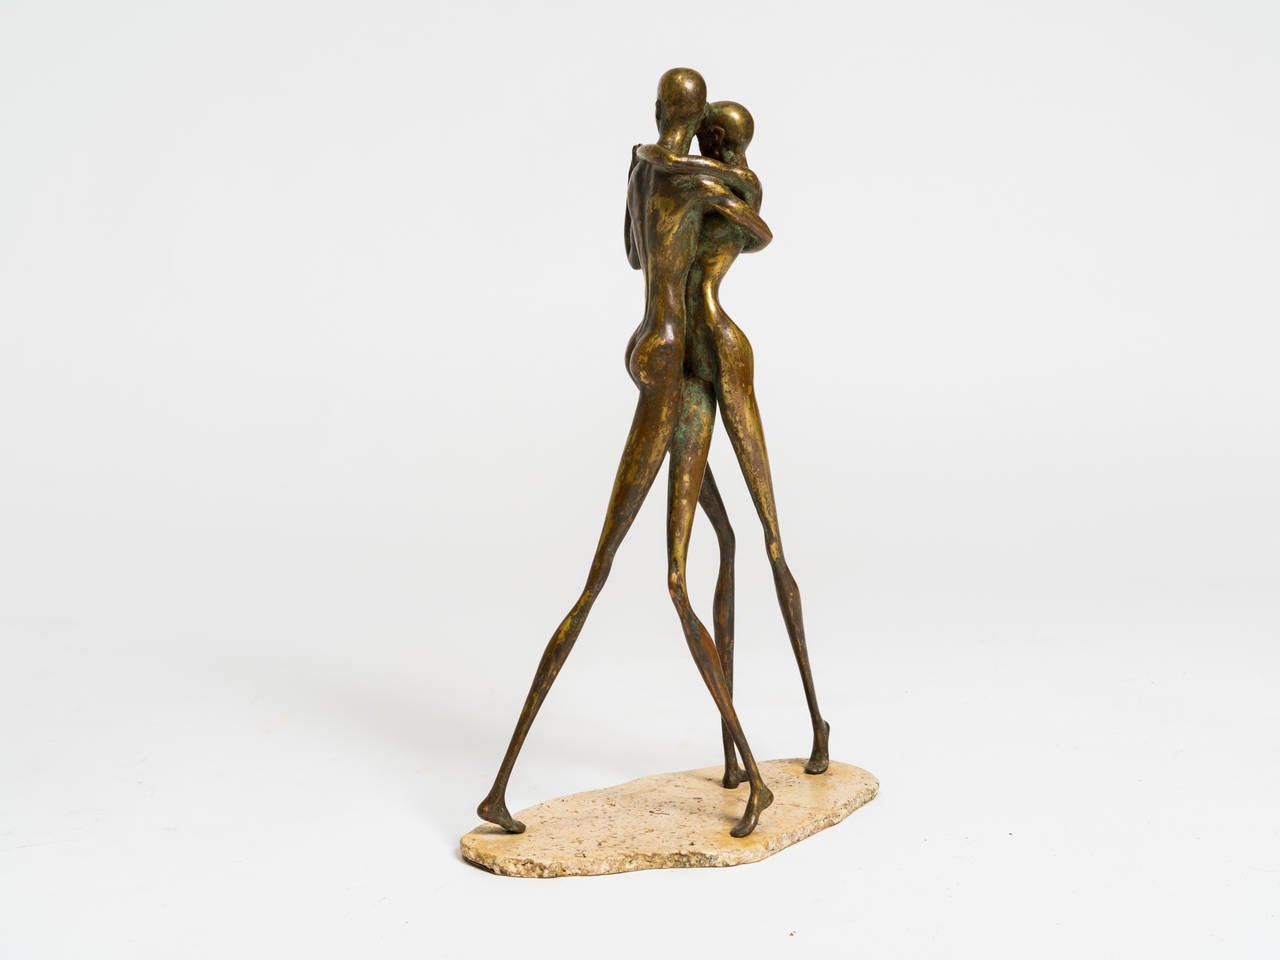 Bronze sculpture of a dancing couple standing on a stone base.
No signature.